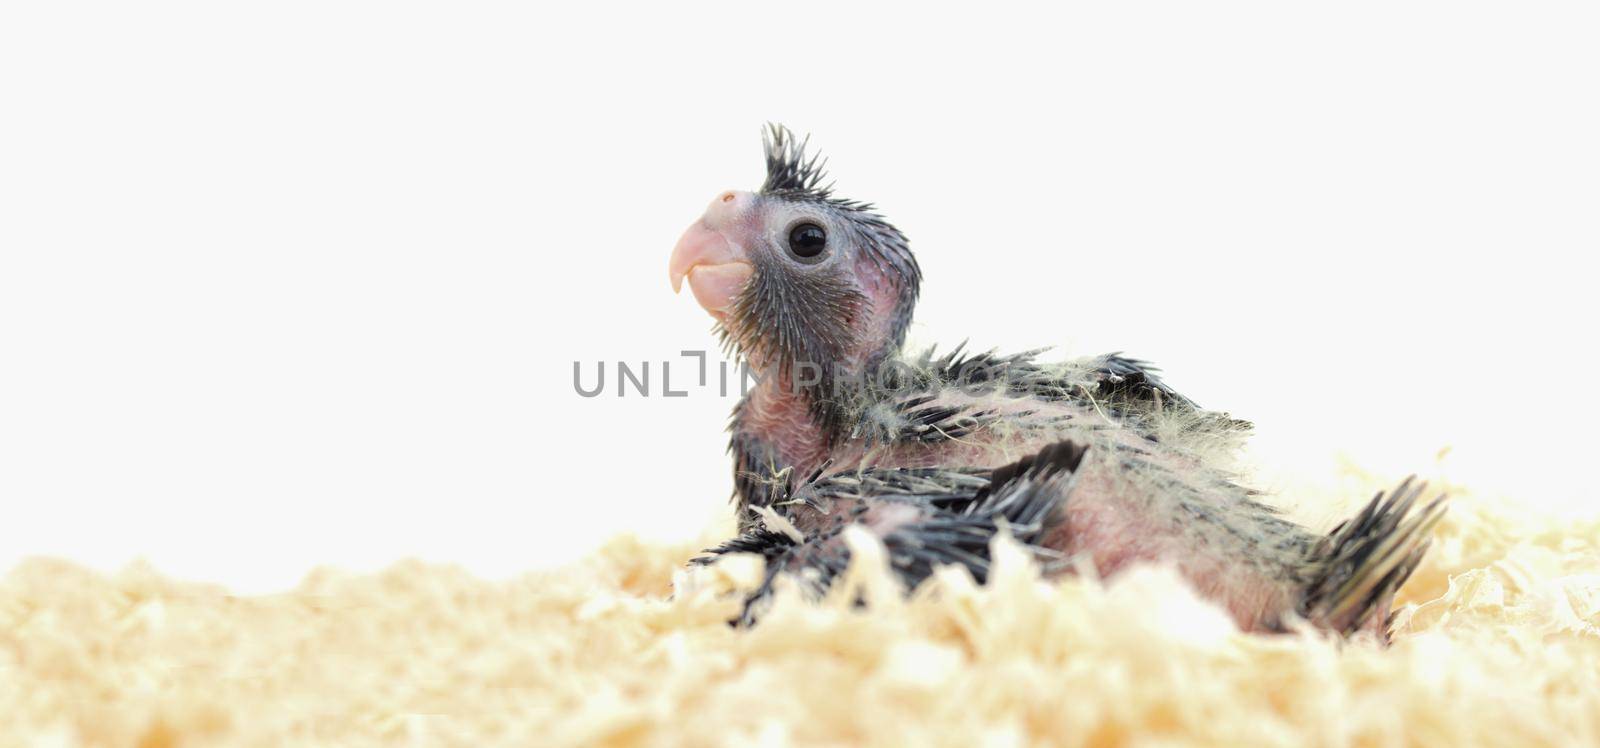 gray cockatiel parrot chick in sawdust on a white background.